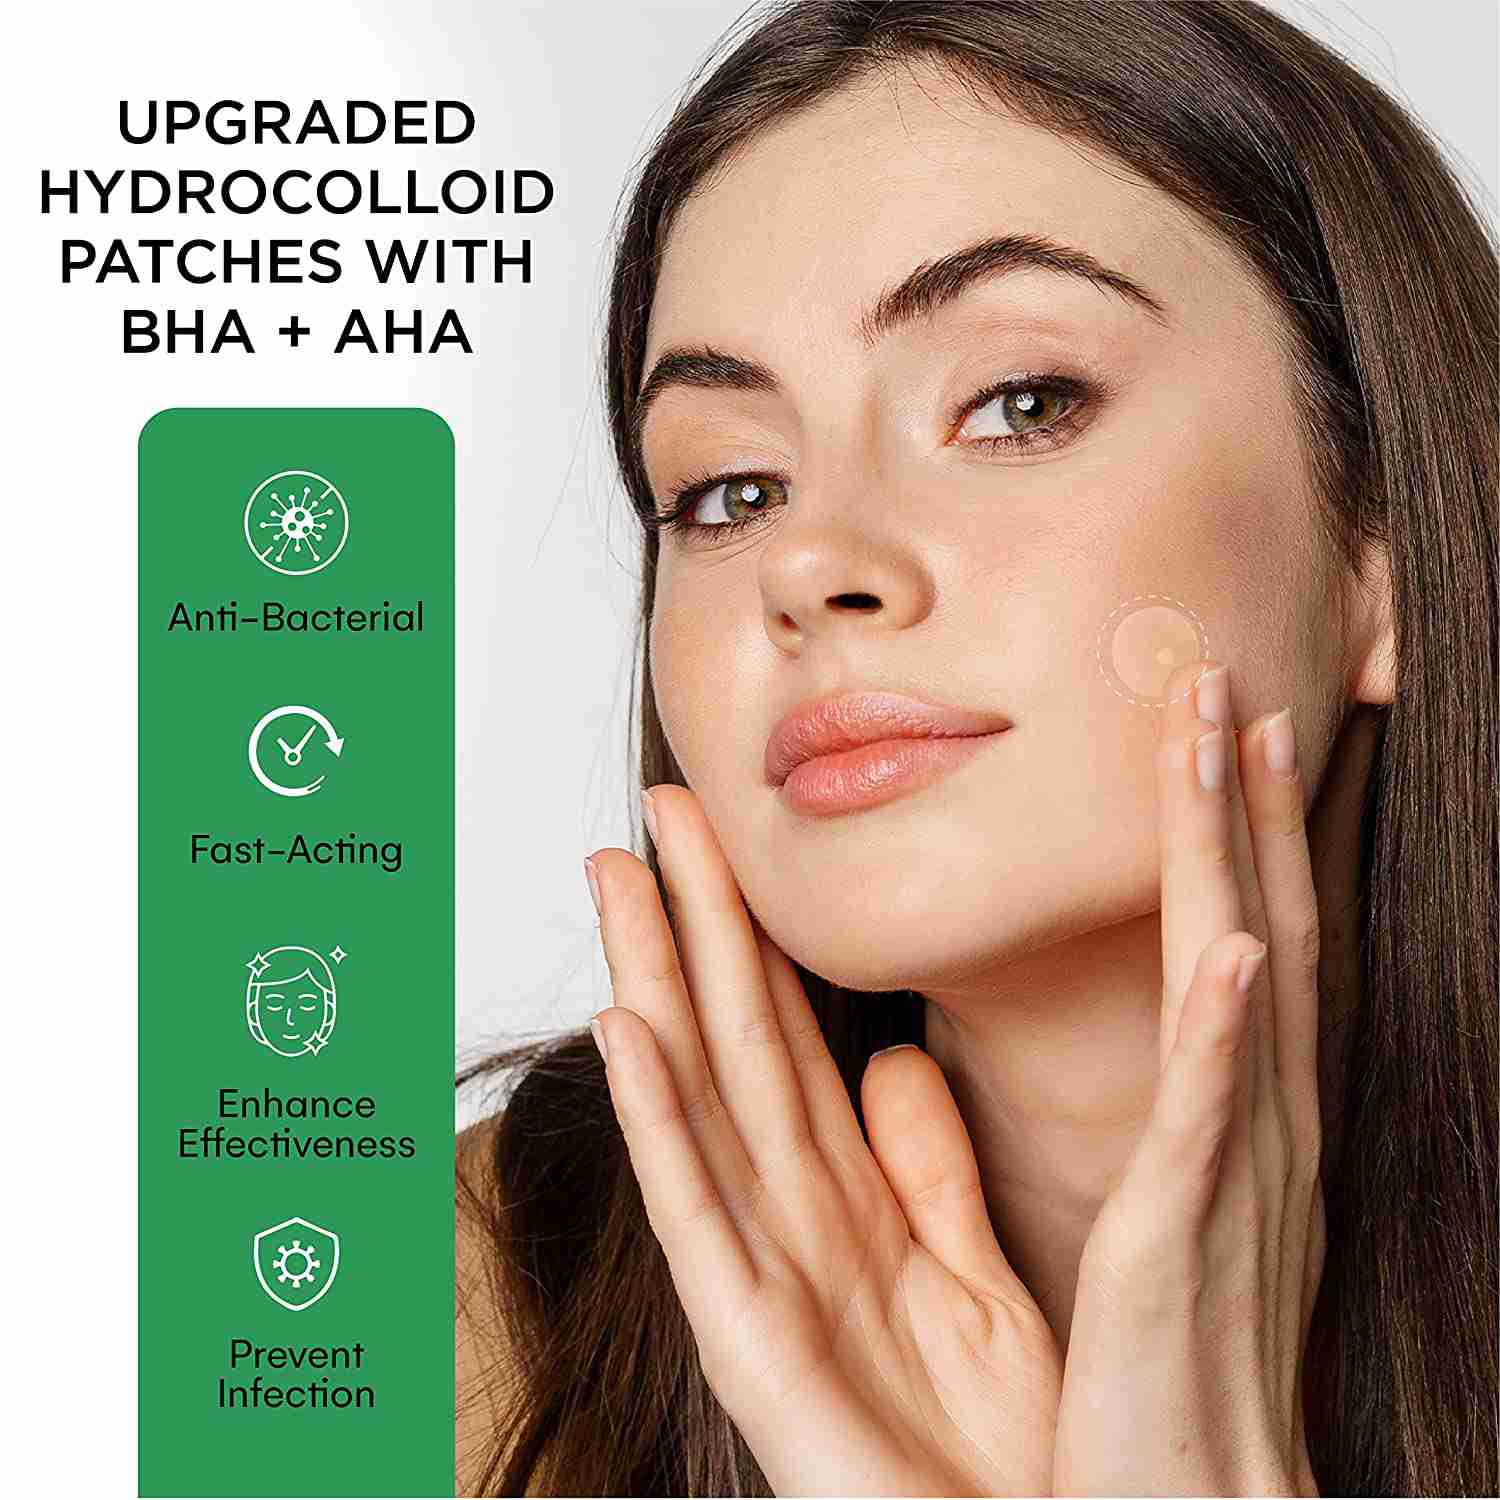 acne-patches-for-face with discount code